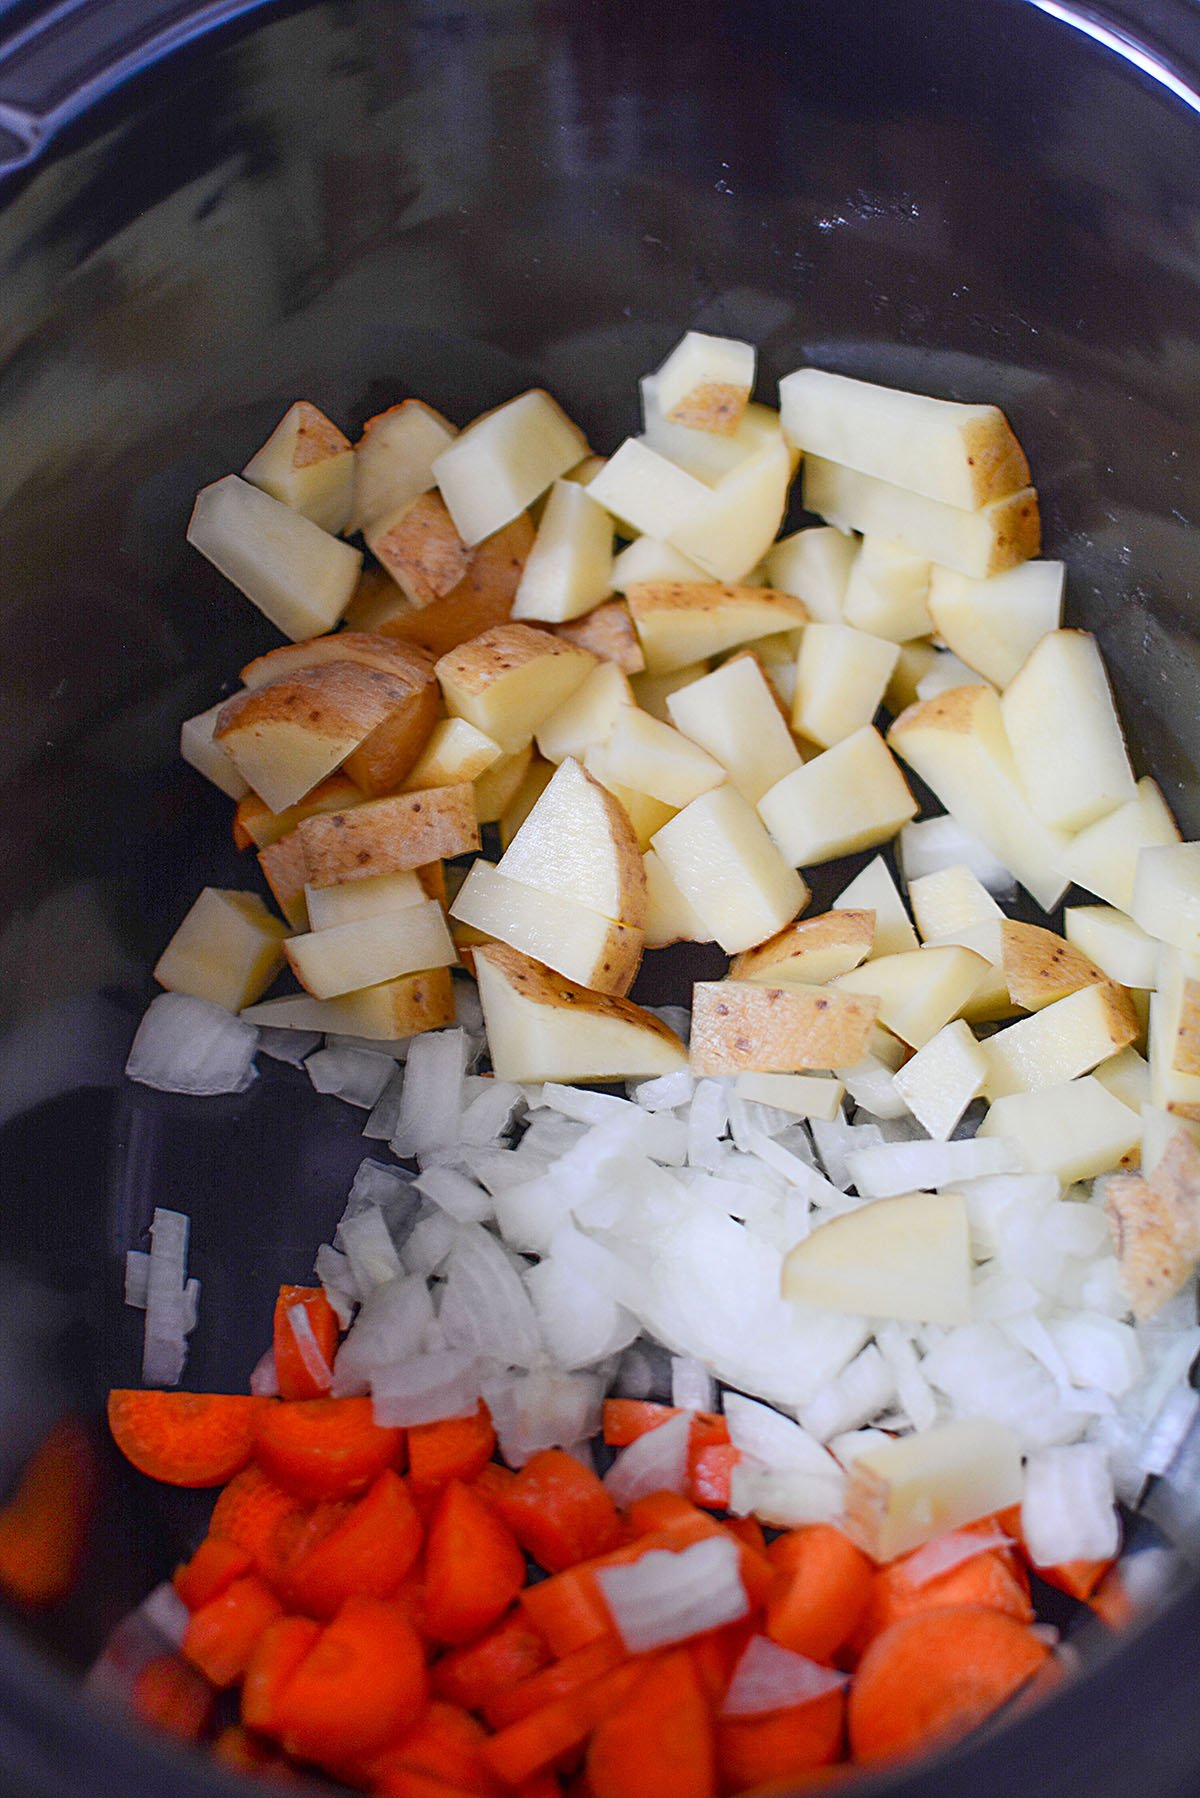 Potatoes, onions and carrots in a slow cooker bowl.